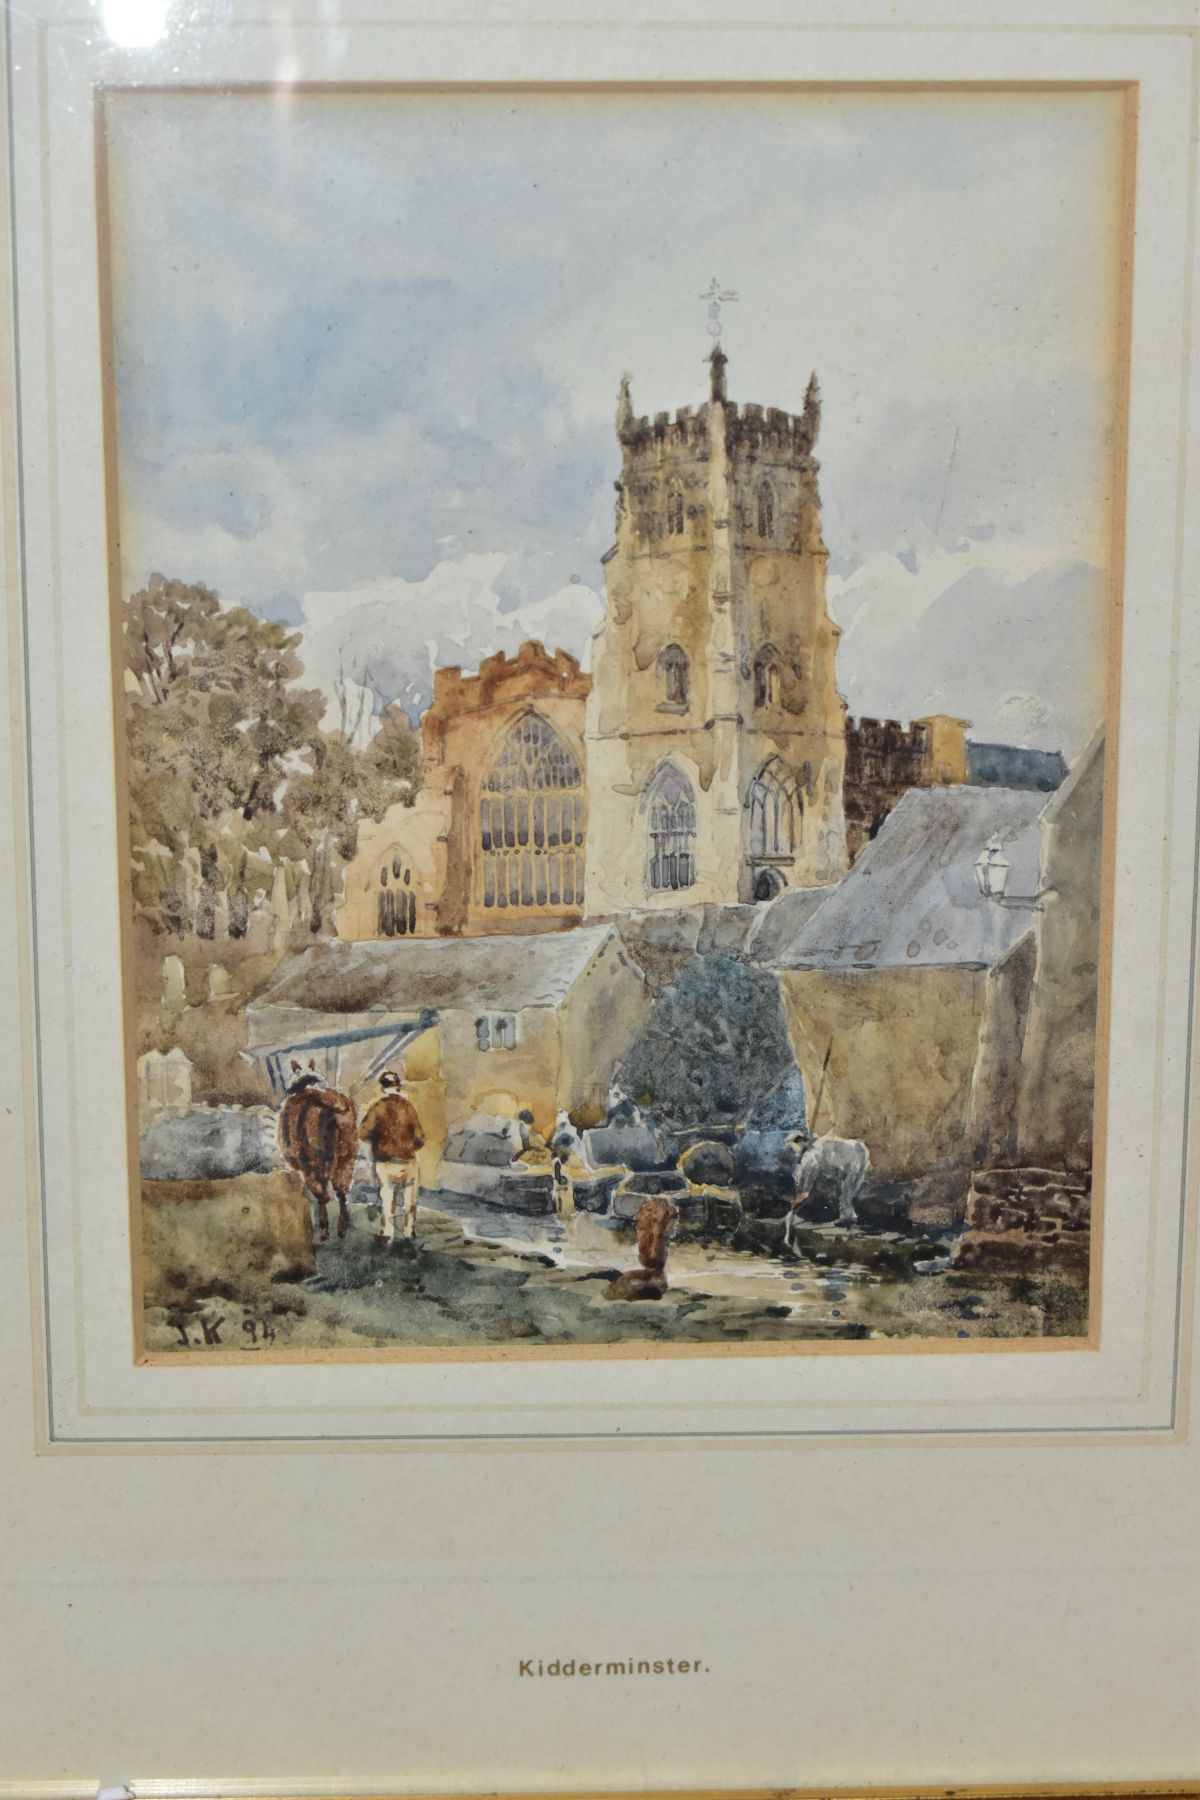 JOHN KEELEY (1849-1930) 'KIDDERMINSTER' a view towards St Mary and All Saints Church, initialled and - Image 2 of 5